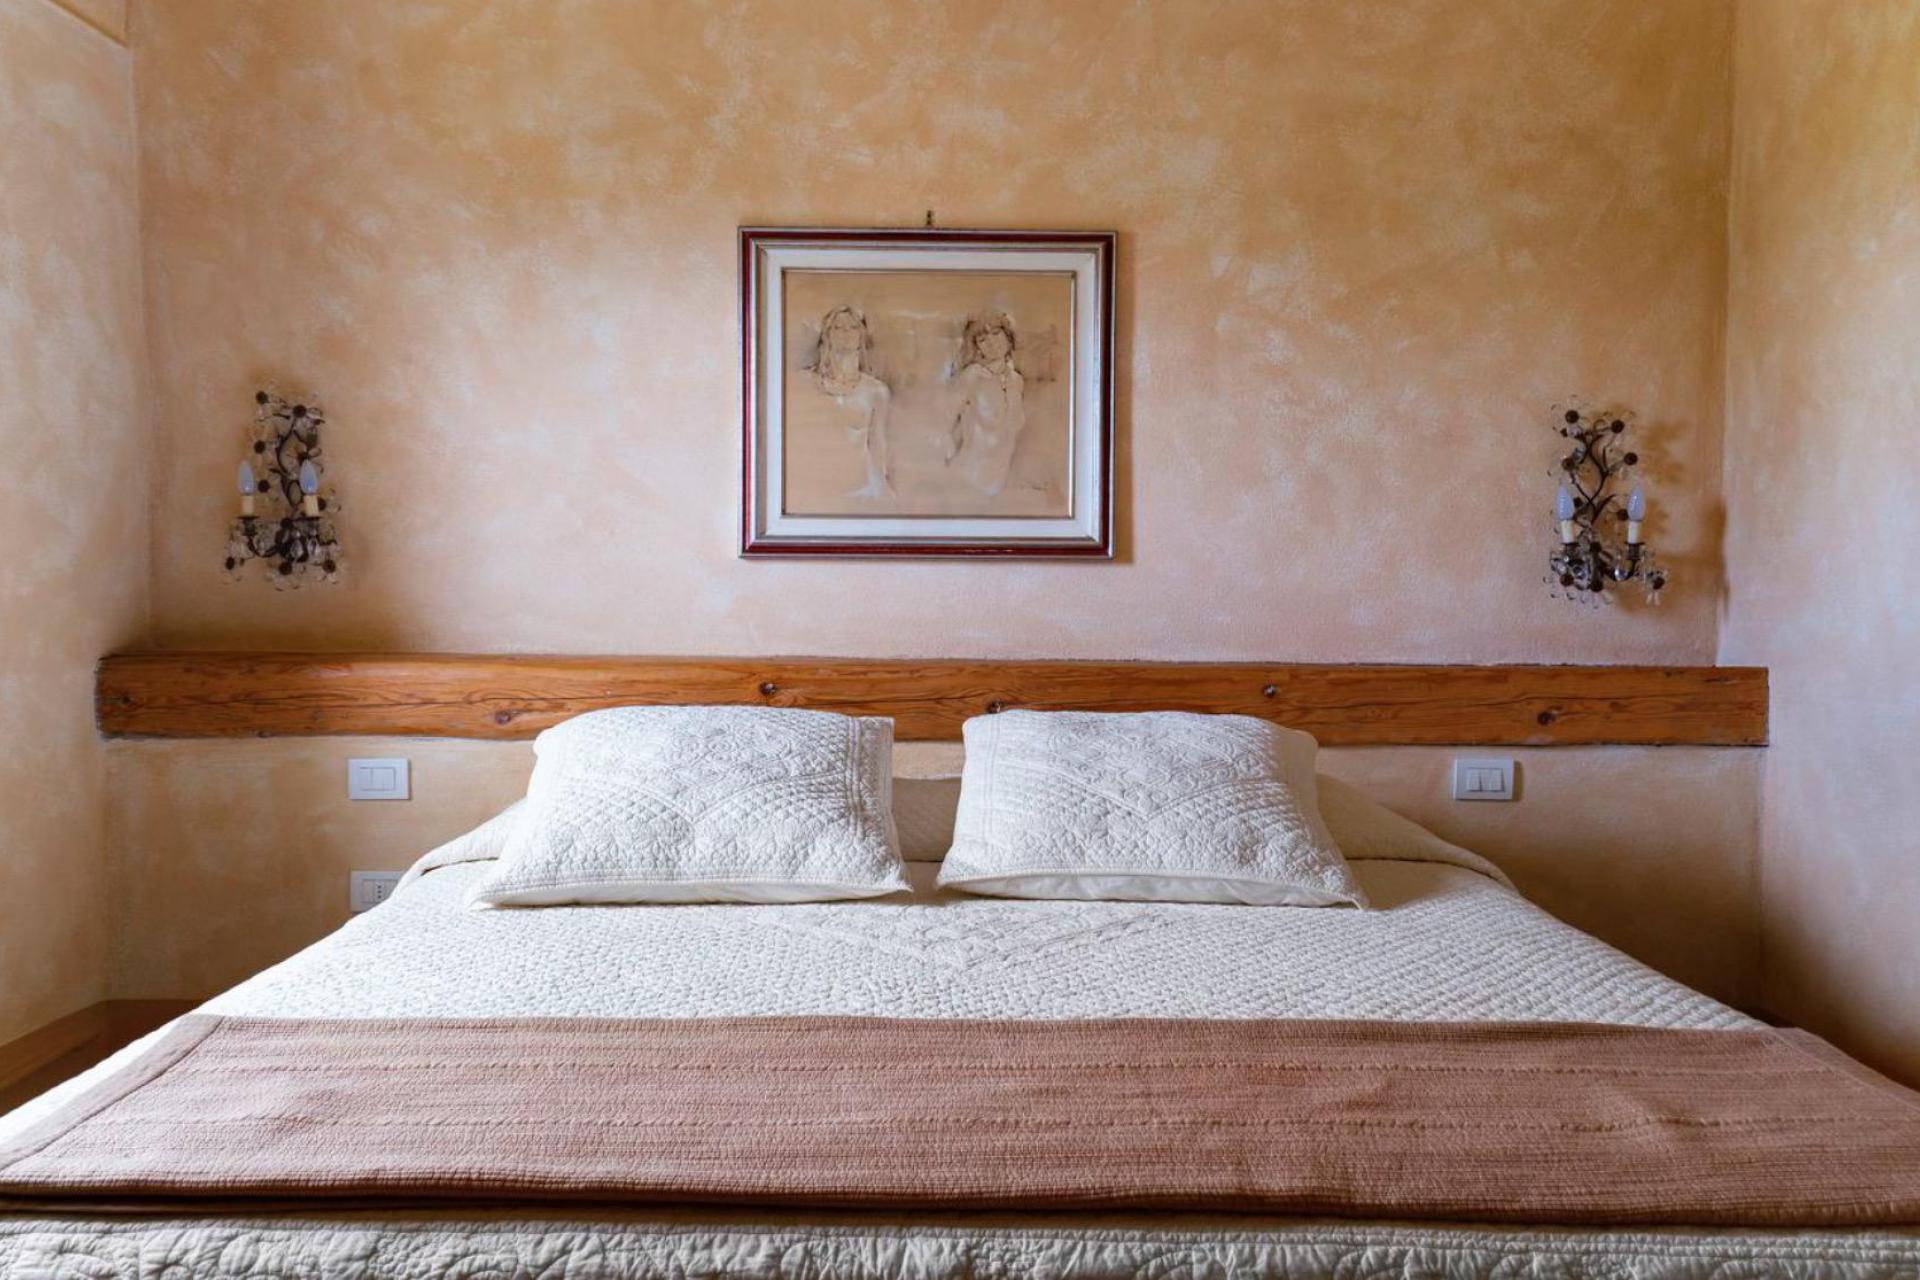 Agriturismo Tuscany Centrally located agriturismo for exploring Tuscany